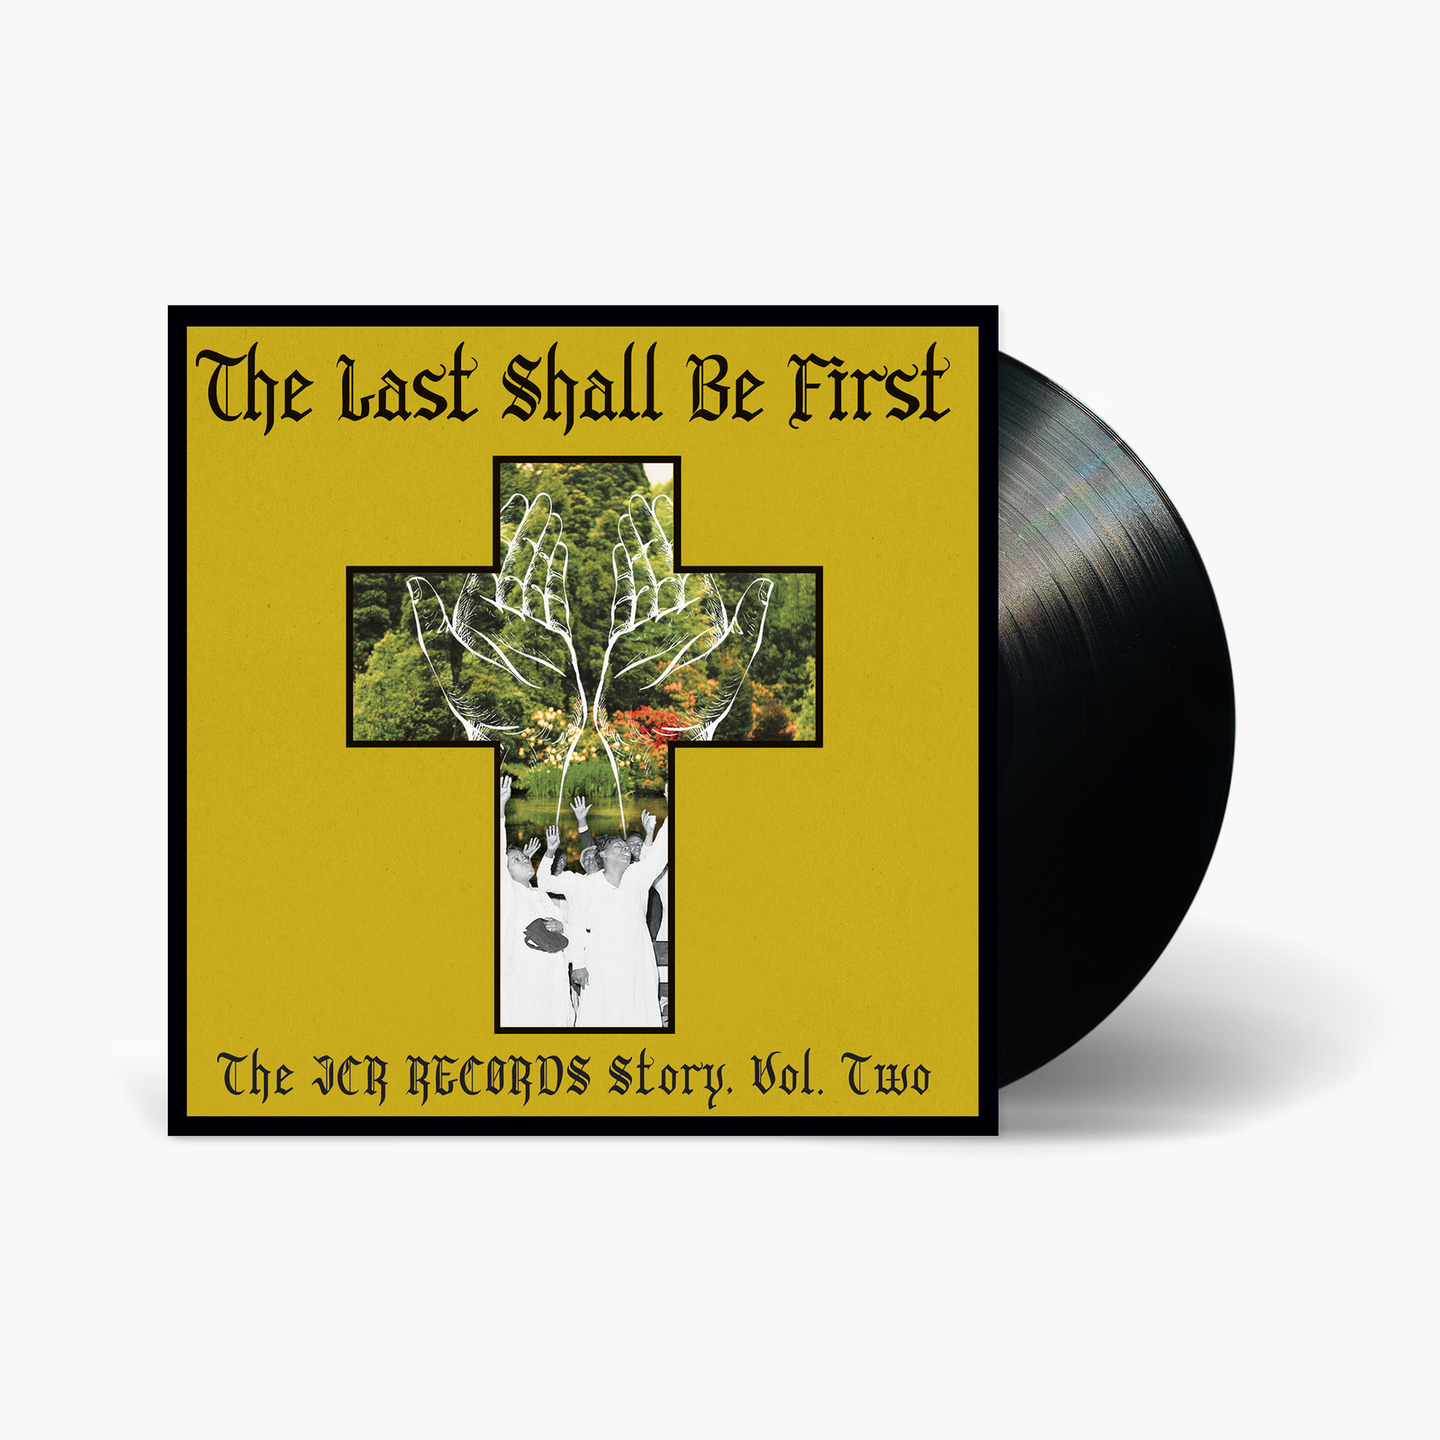 The Last Shall Be First: The JCR Records Story. Volume 2